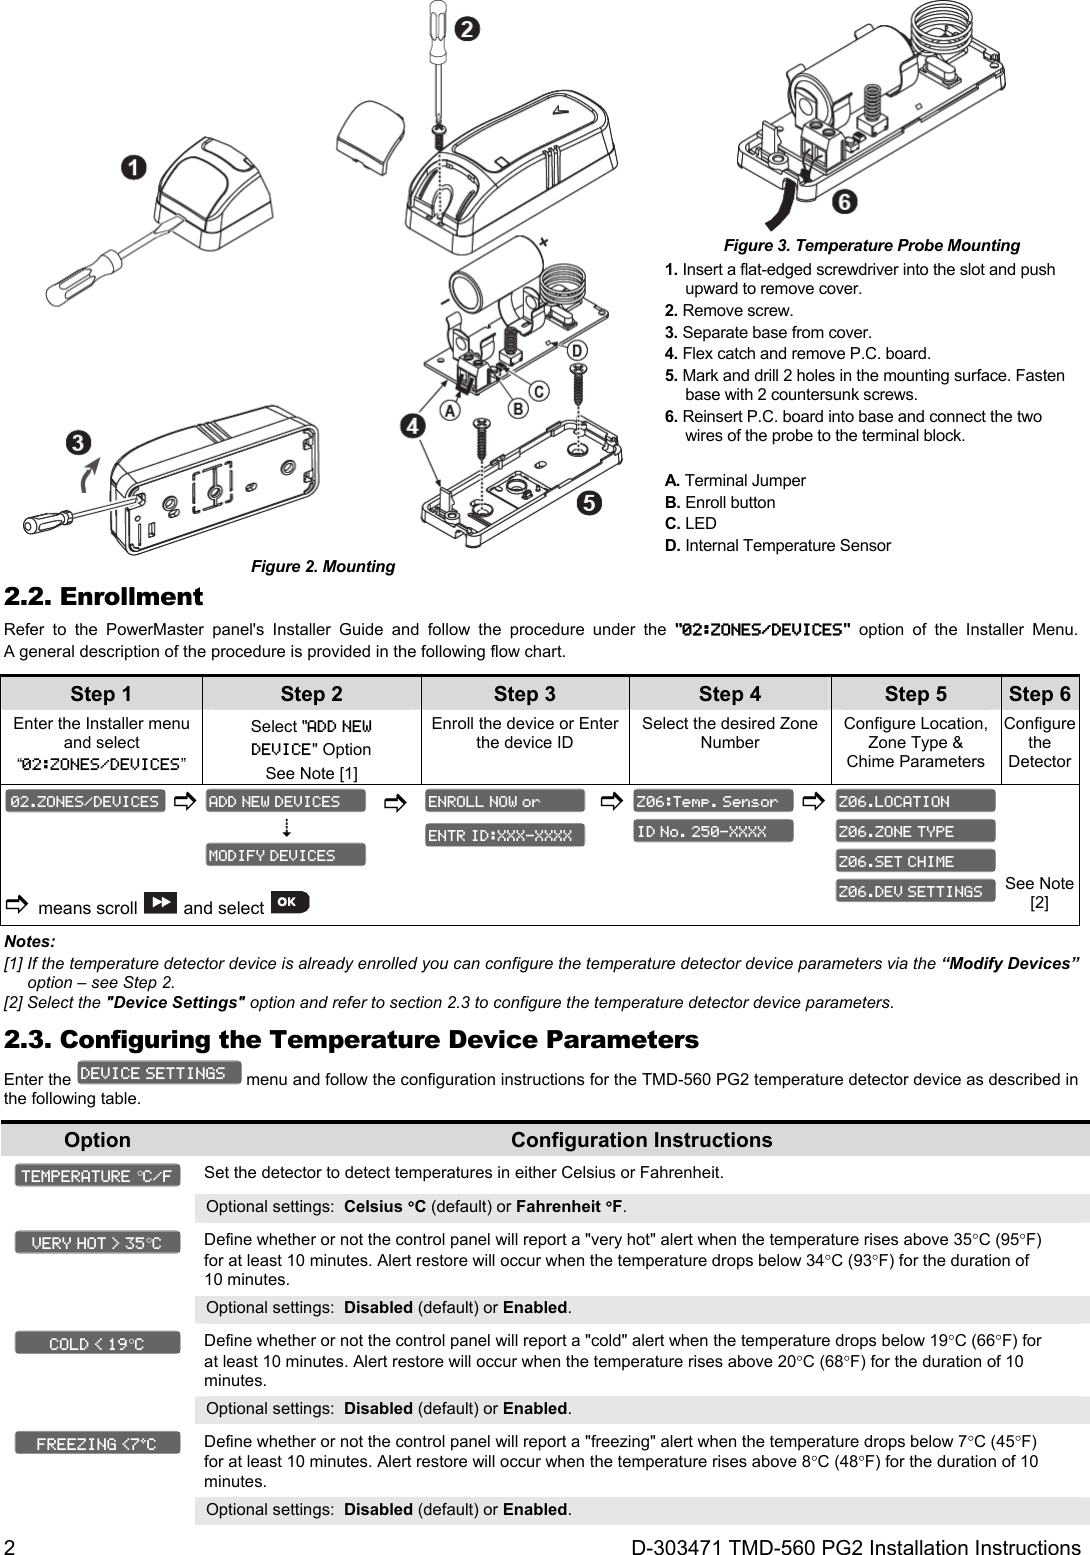 2 D-303471 TMD-560 PG2 Installation Instructions  Figure 2. Mounting  Figure 3. Temperature Probe Mounting 1. Insert a flat-edged screwdriver into the slot and push upward to remove cover. 2. Remove screw. 3. Separate base from cover. 4. Flex catch and remove P.C. board. 5. Mark and drill 2 holes in the mounting surface. Fasten base with 2 countersunk screws. 6. Reinsert P.C. board into base and connect the two wires of the probe to the terminal block. A. Terminal Jumper  B. Enroll button C. LED  D. Internal Temperature Sensor 2.2. Enrollment Refer to the PowerMaster panel&apos;s Installer Guide and follow the procedure under the &quot;02:ZONES/DEVICES&quot; option of the Installer Menu. A general description of the procedure is provided in the following flow chart. Step 1 Step 2 Step 3 Step 4   Step 5 Step 6Enter the Installer menu and select “02:ZONES/DEVICES” Select &quot;ADD NEW  DEVICE&quot; Option  See Note [1] Enroll the device or Enter the device ID Select the desired Zone Number Configure Location, Zone Type &amp; Chime Parameters Configure the Detector            means scroll  and select        See Note [2] Notes:  [1] If the temperature detector device is already enrolled you can configure the temperature detector device parameters via the “Modify Devices” option – see Step 2. [2] Select the &quot;Device Settings&quot; option and refer to section 2.3 to configure the temperature detector device parameters. 2.3. Configuring the Temperature Device Parameters Enter the   menu and follow the configuration instructions for the TMD-560 PG2 temperature detector device as described in the following table. Option  Configuration Instructions   Set the detector to detect temperatures in either Celsius or Fahrenheit. Optional settings:  Celsius C (default) or Fahrenheit F.   Define whether or not the control panel will report a &quot;very hot&quot; alert when the temperature rises above 35C (95F) for at least 10 minutes. Alert restore will occur when the temperature drops below 34C (93F) for the duration of 10 minutes. Optional settings:  Disabled (default) or Enabled.   Define whether or not the control panel will report a &quot;cold&quot; alert when the temperature drops below 19C (66F) for at least 10 minutes. Alert restore will occur when the temperature rises above 20C (68F) for the duration of 10 minutes. Optional settings:  Disabled (default) or Enabled.   Define whether or not the control panel will report a &quot;freezing&quot; alert when the temperature drops below 7C (45F) for at least 10 minutes. Alert restore will occur when the temperature rises above 8C (48F) for the duration of 10 minutes. Optional settings:  Disabled (default) or Enabled. FREEZING &lt;7ºC  COLD &lt; 19C VERY HOT &gt; 35C TEMPERATURE C/F DEVICE SETTINGS Z06.DEV SETTINGS Z06.SET CHIME Z06.ZONE TYPE Z06.LOCATION ID No. 250-XXXX Z06:Temp. Sensor ENTR ID:XXX-XXXX ENROLL NOW or MODIFY DEVICES ADD NEW DEVICES 02.ZONES/DEVICES 